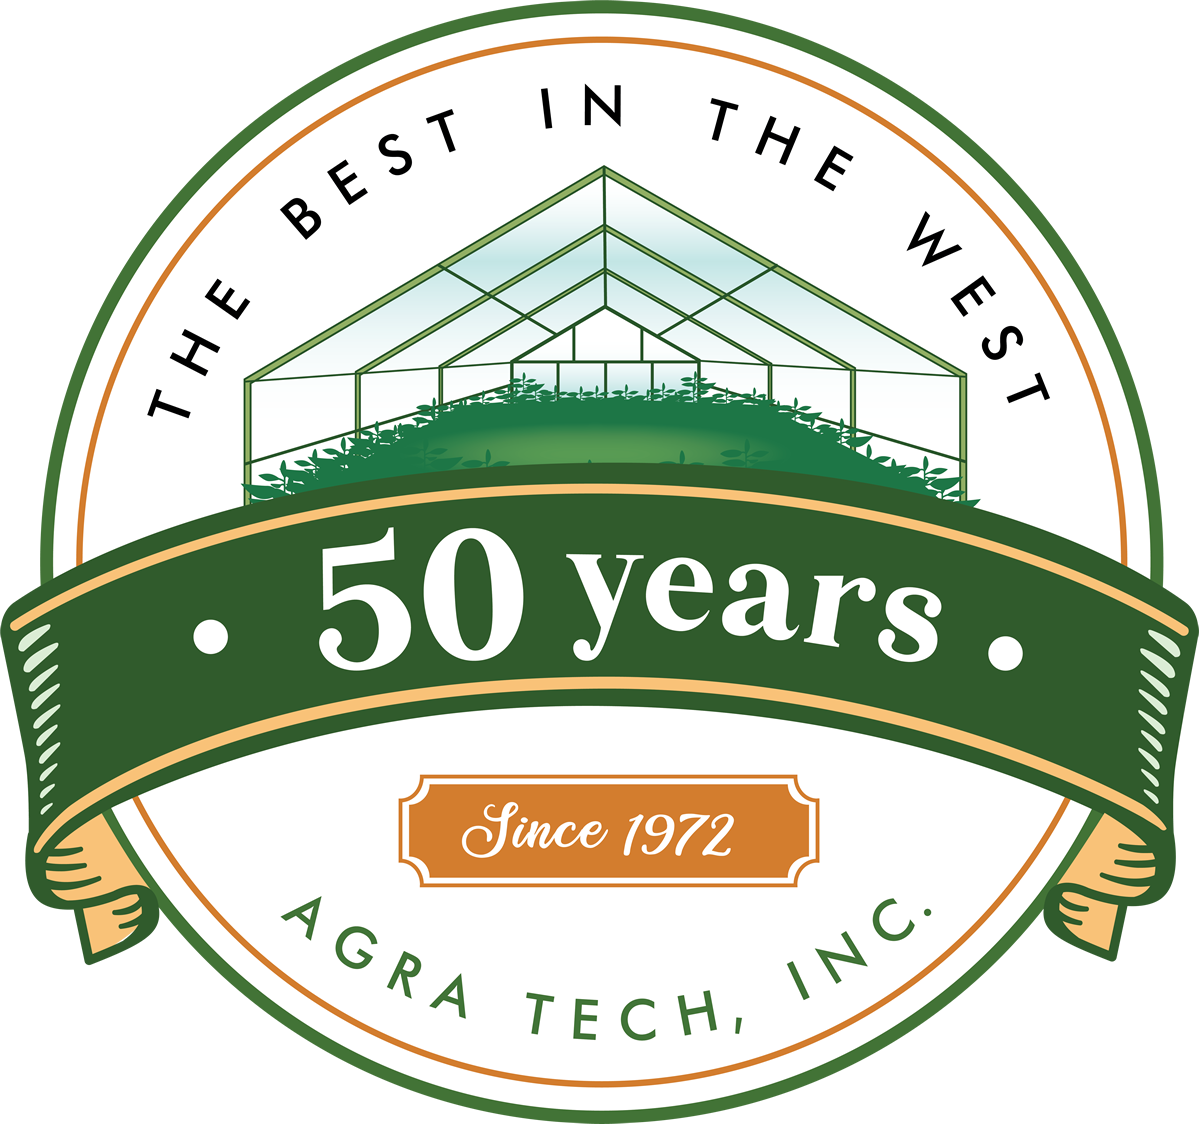 Agra Tech 50 years anniversary | Commercial Greenhouse Manufacturer